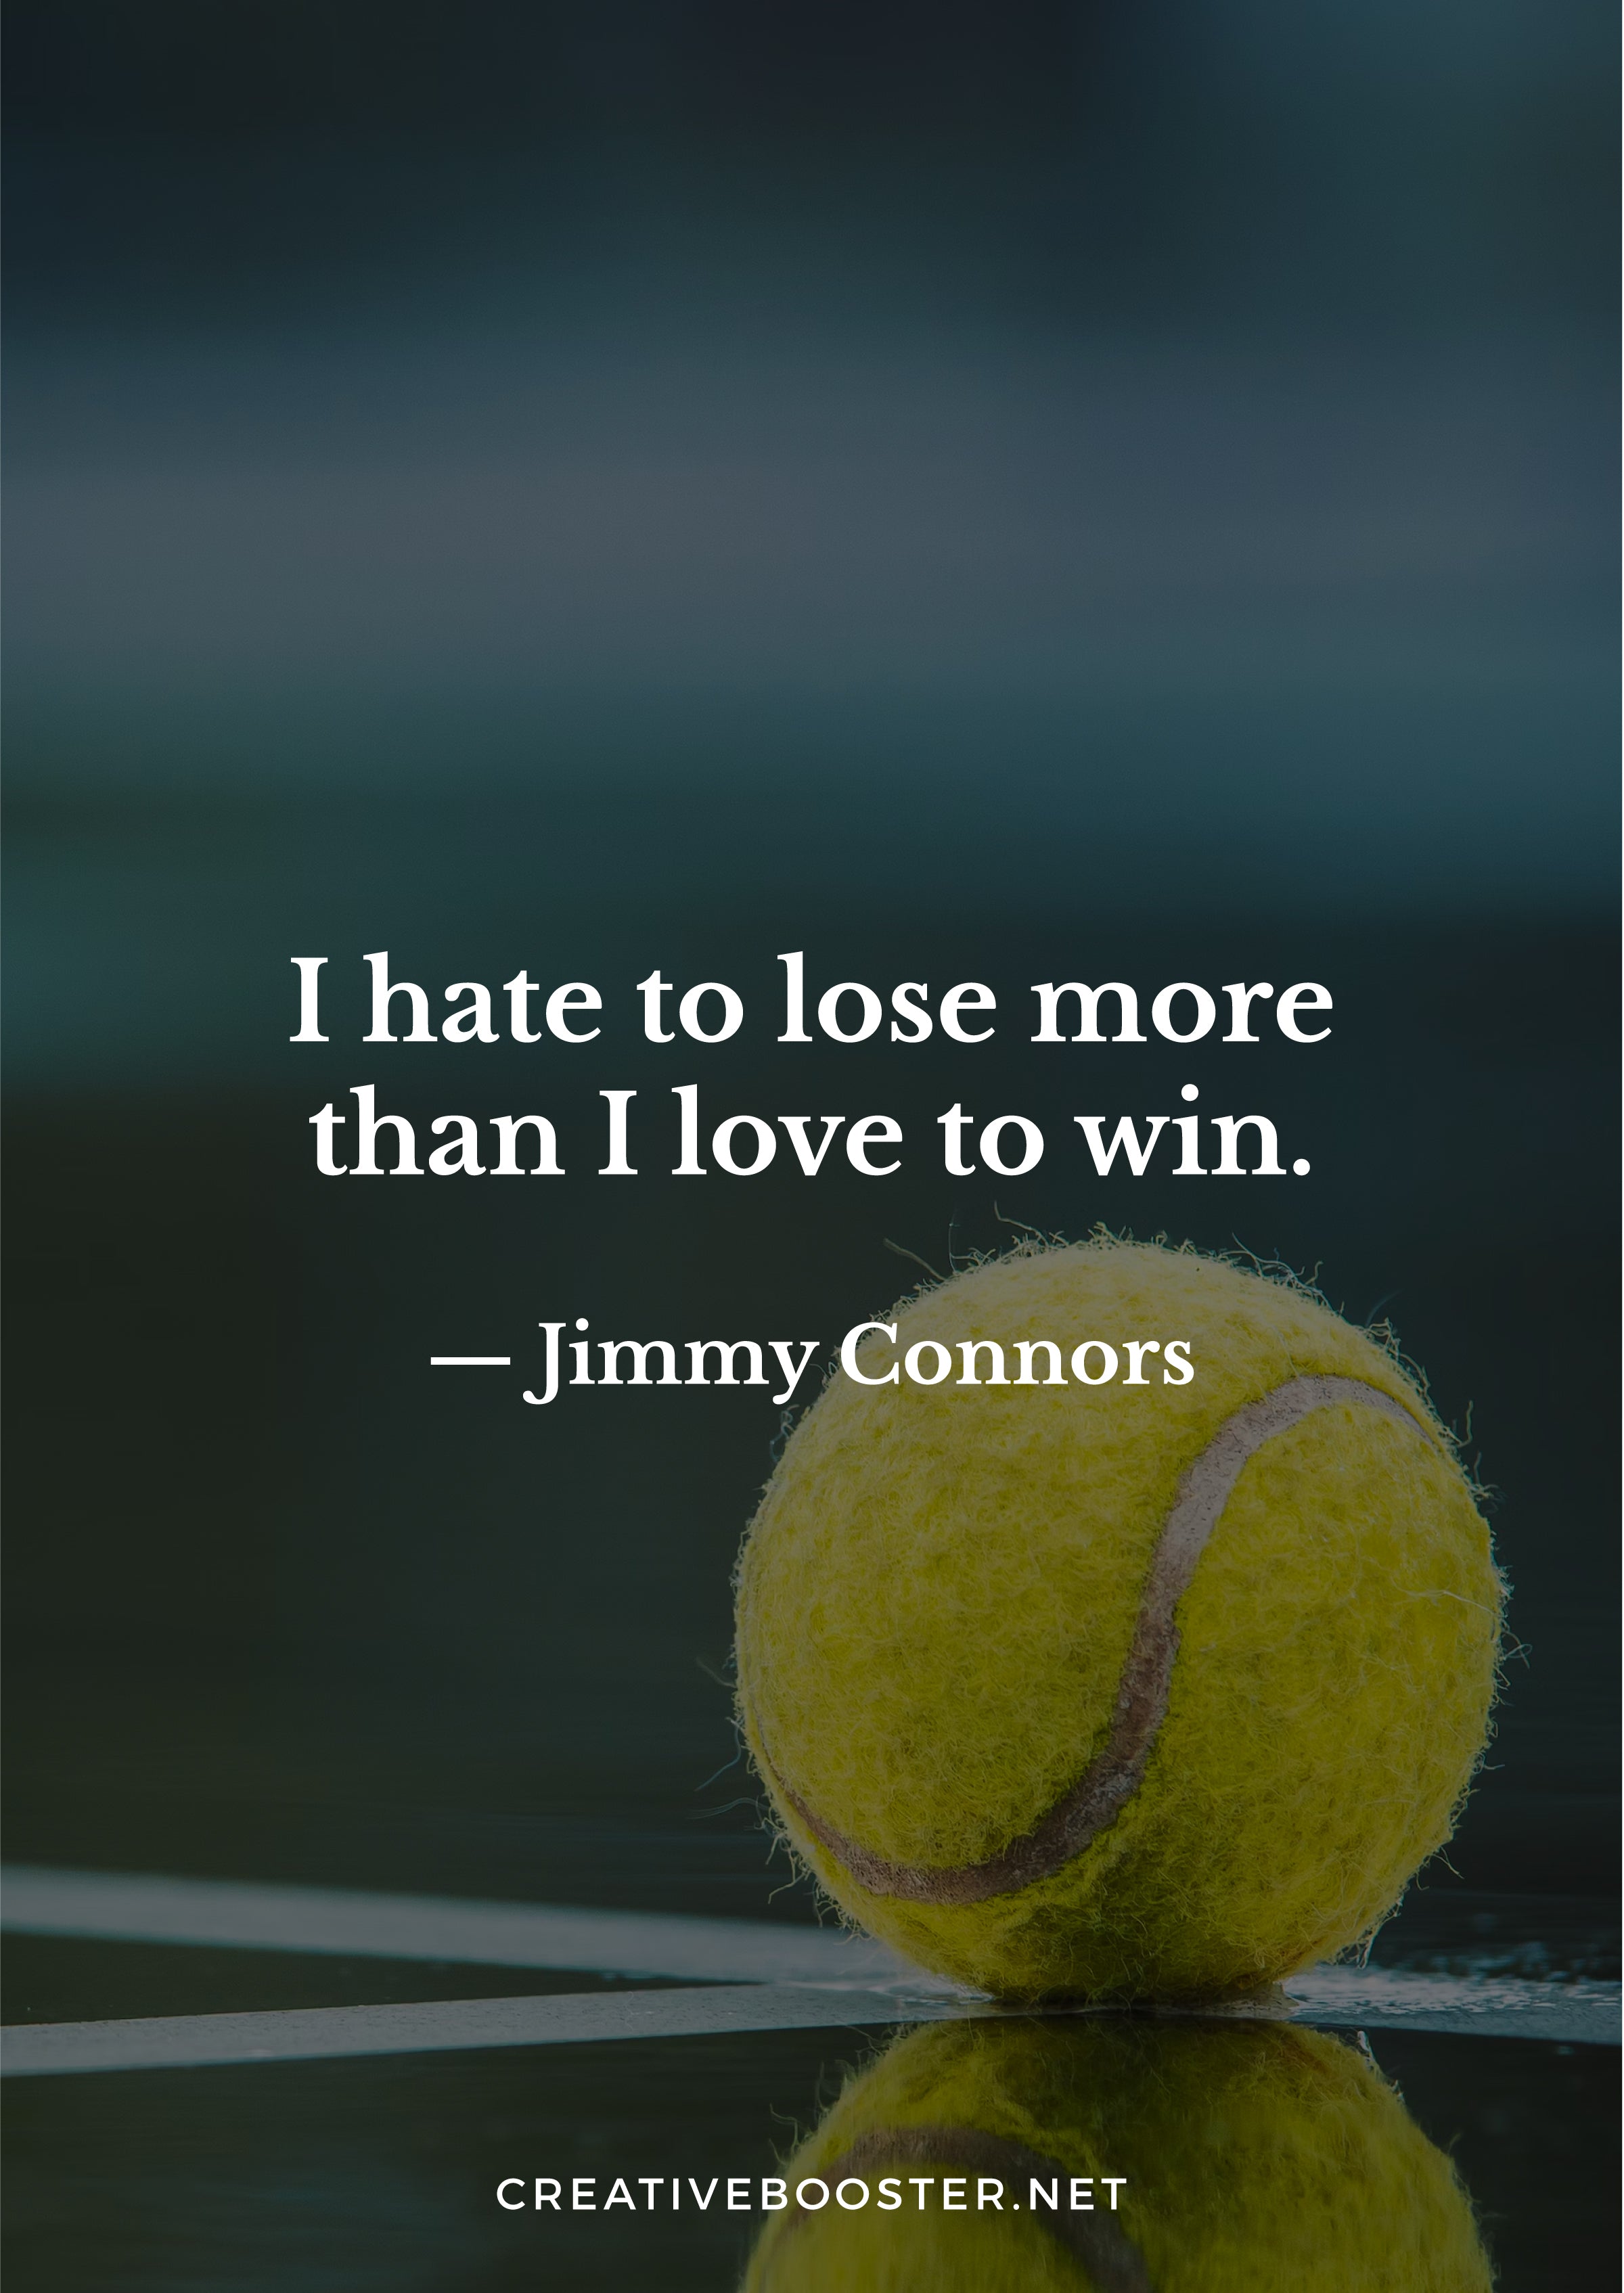 "I hate to lose more than I love to win." – Jimmy Connors